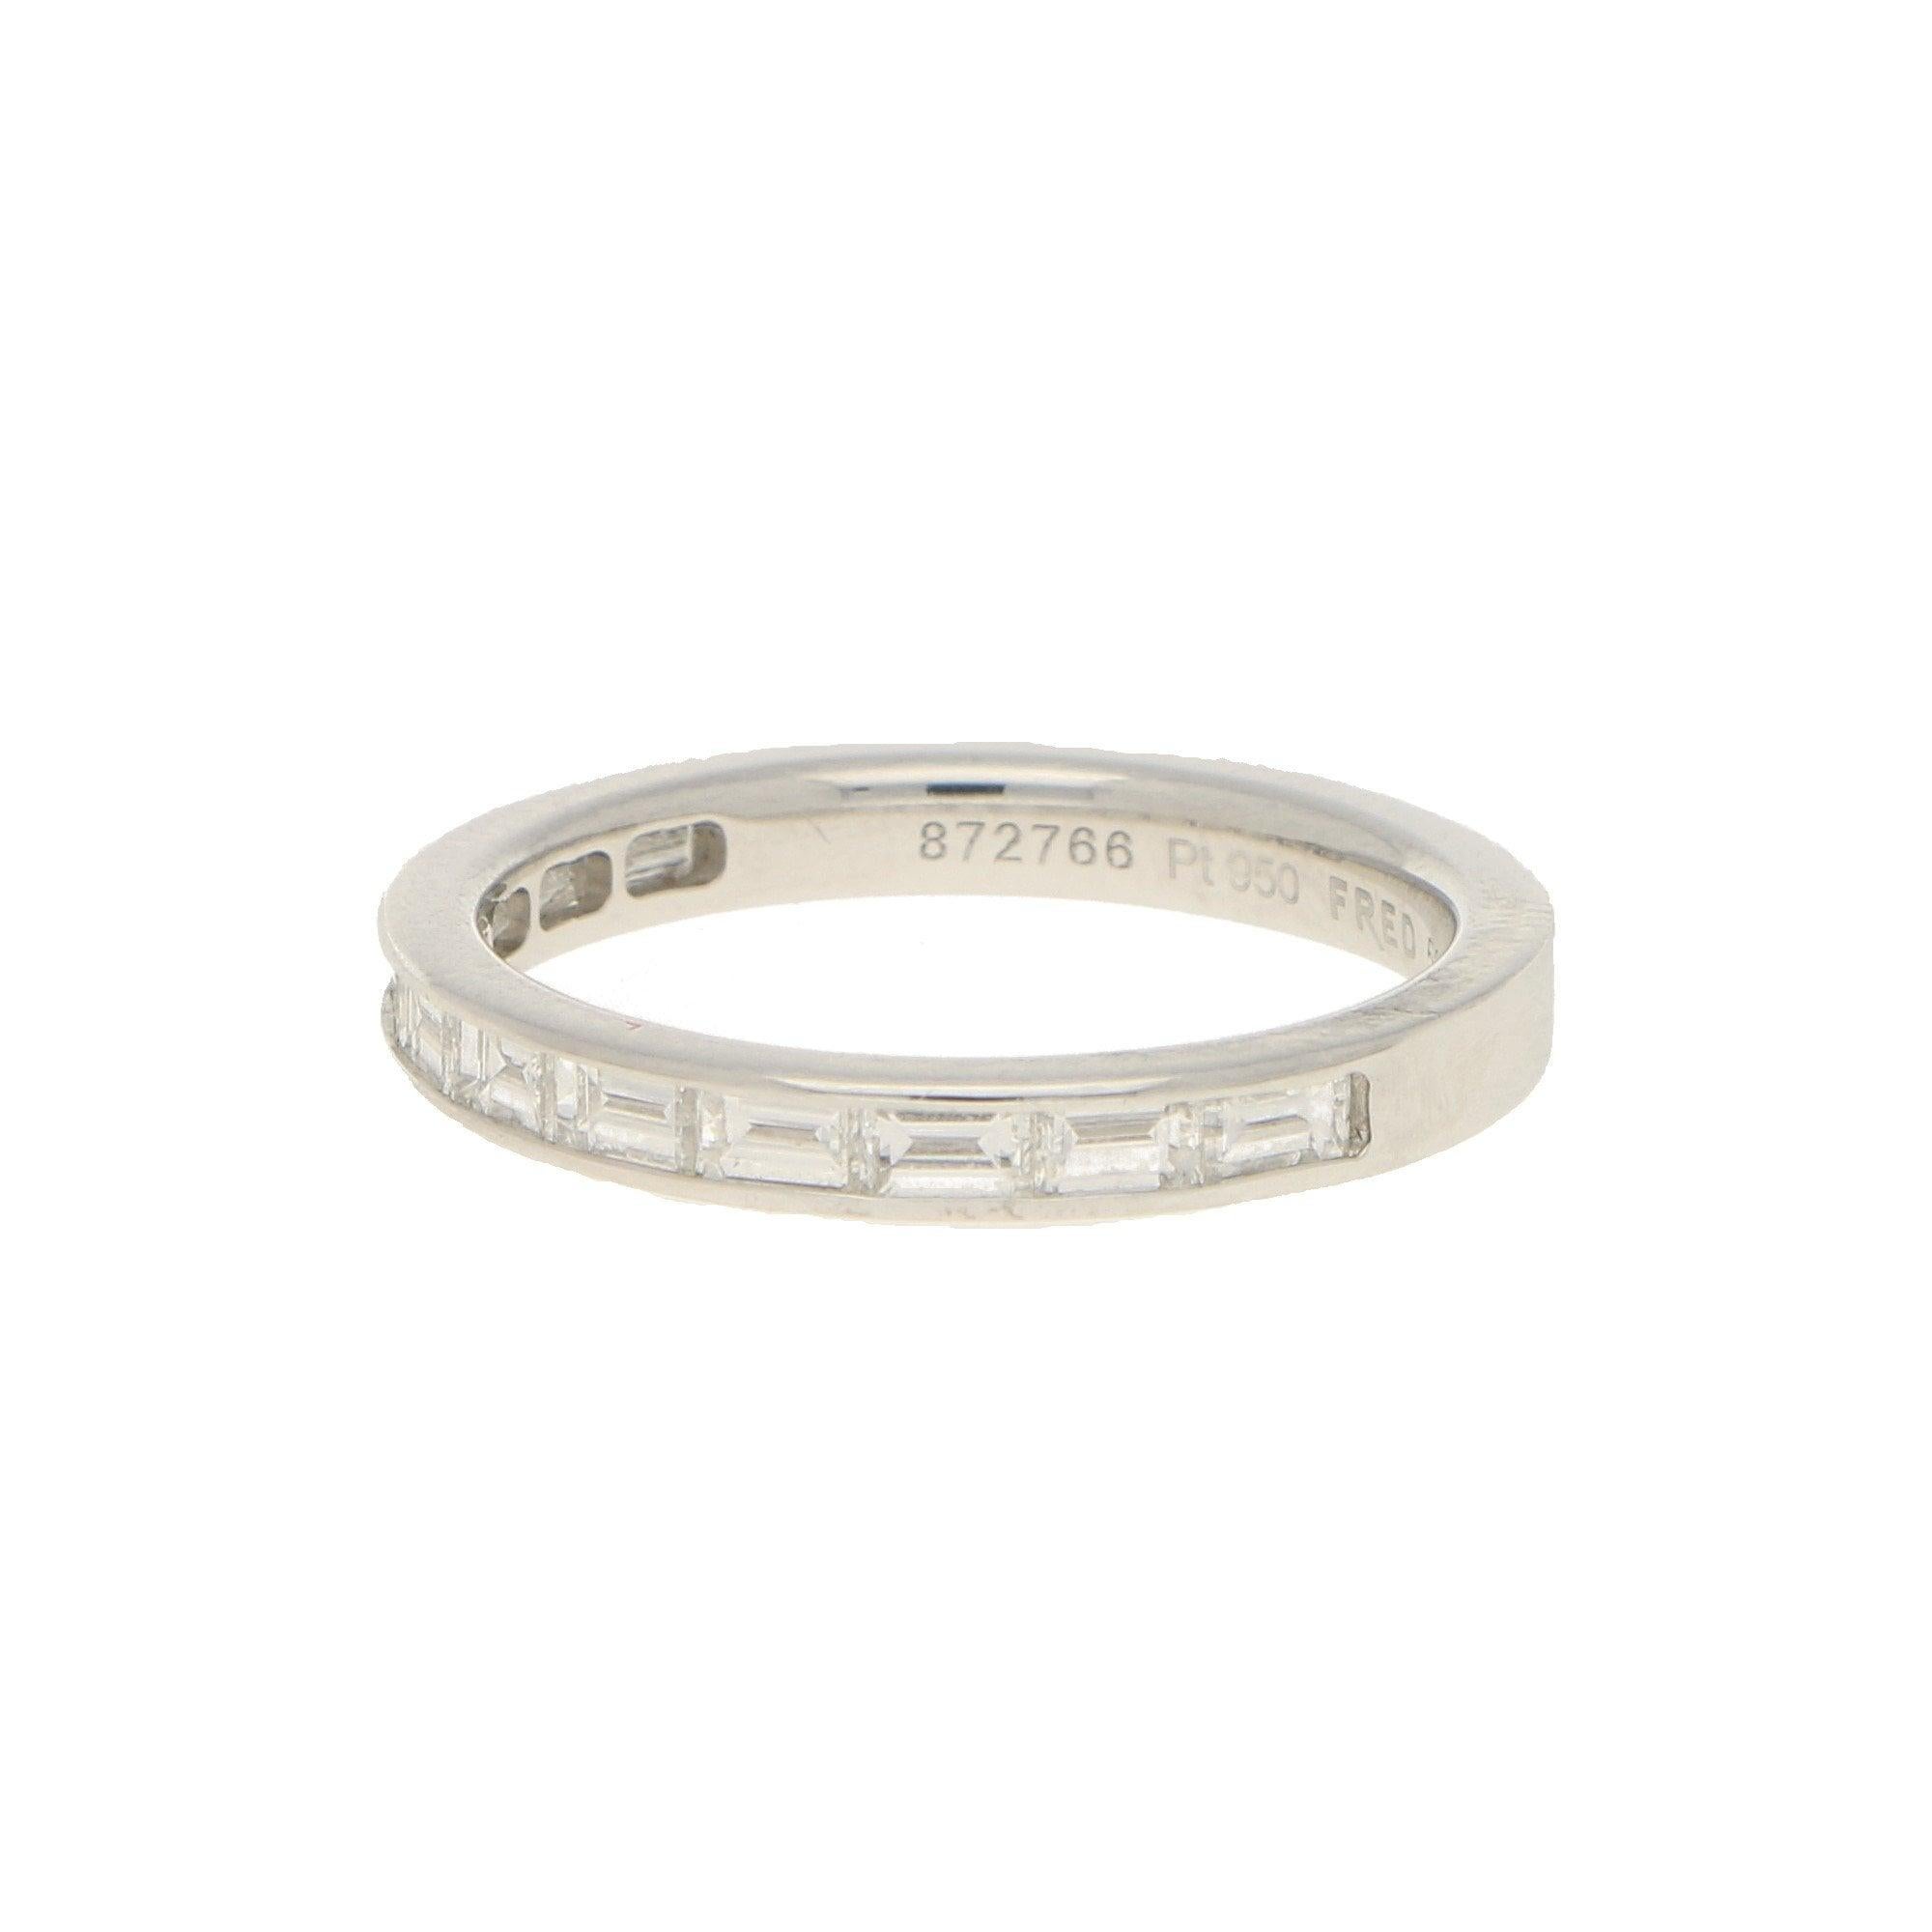 Diamonds approximately 0.55 carats in total, G colour, VS clarity.
A vintage Fred Paris baguette-cut diamond half-eternity band in platinum. 
The ring features eleven channel-set baguette-cut diamonds, to a solid flat court-shape 2.7mm wide ring. 